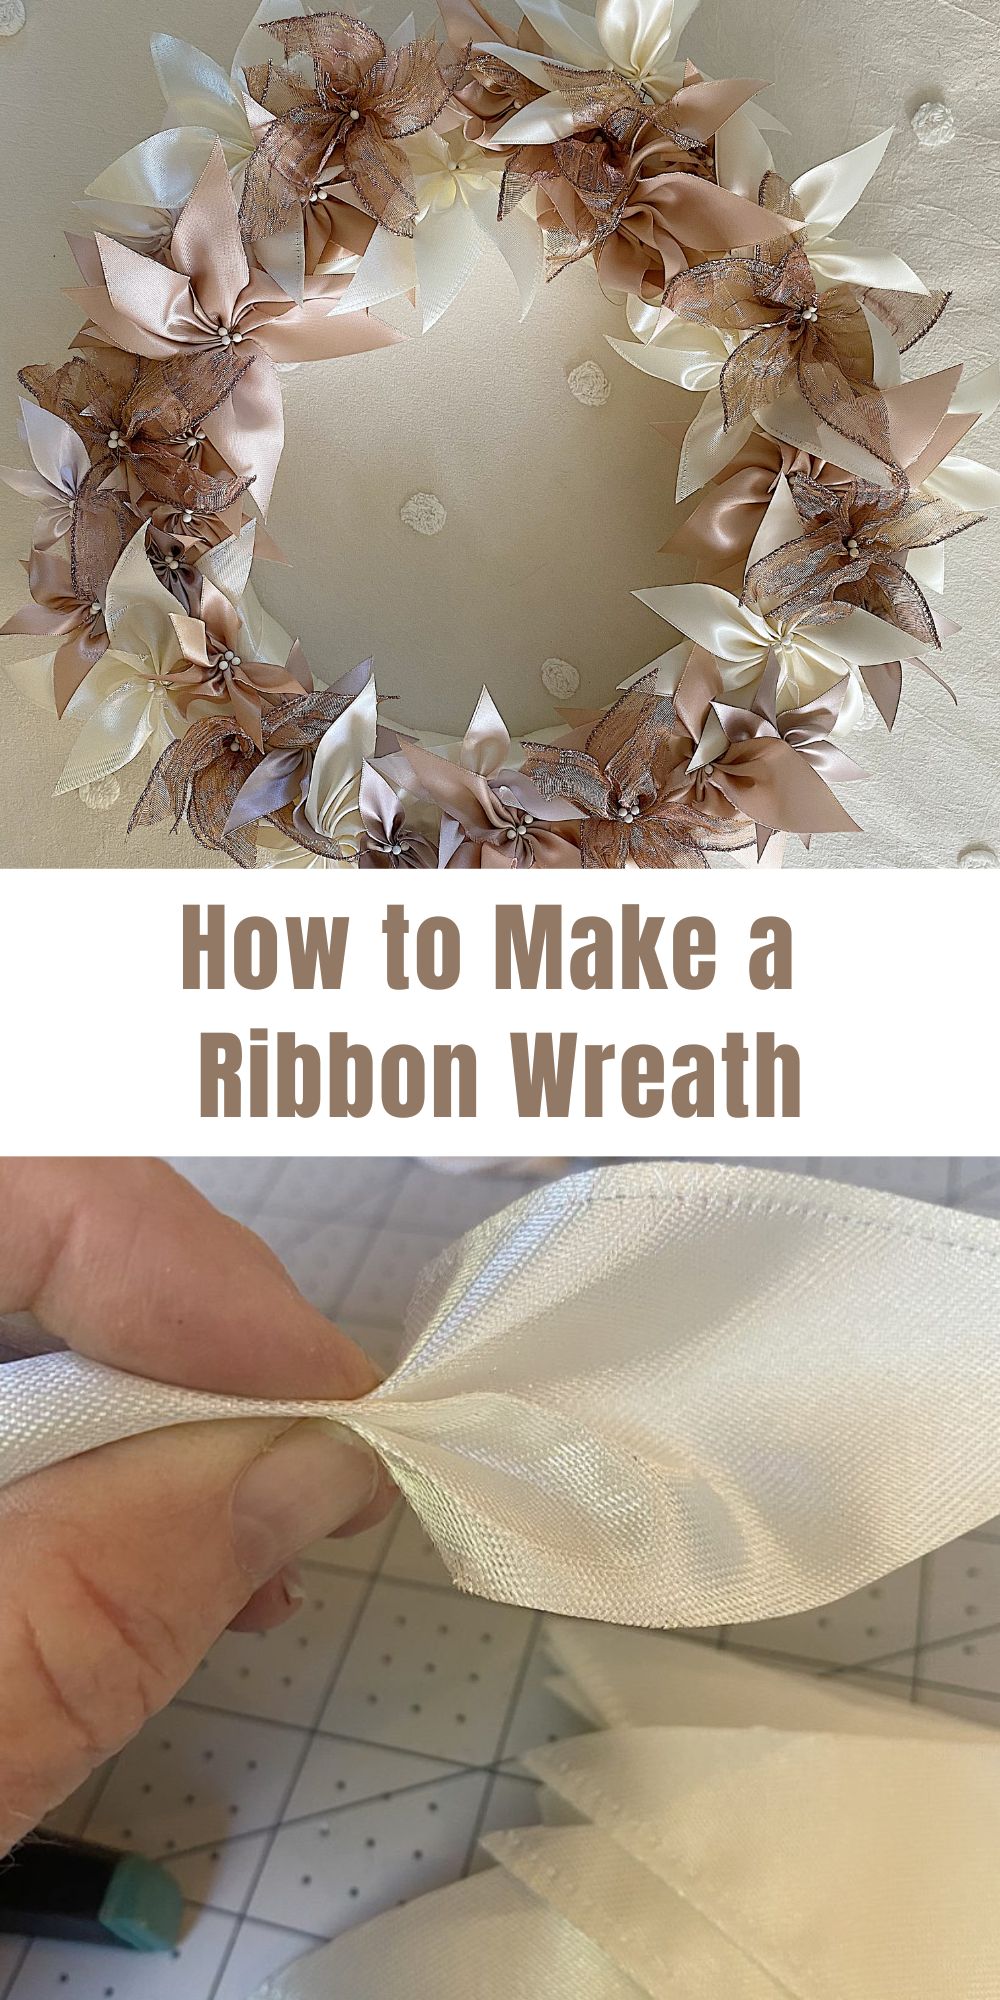 I love my new Christmas wreath and today I am sharing how to make a ribbon wreath. This is a pretty yet easy DIY holiday craft.